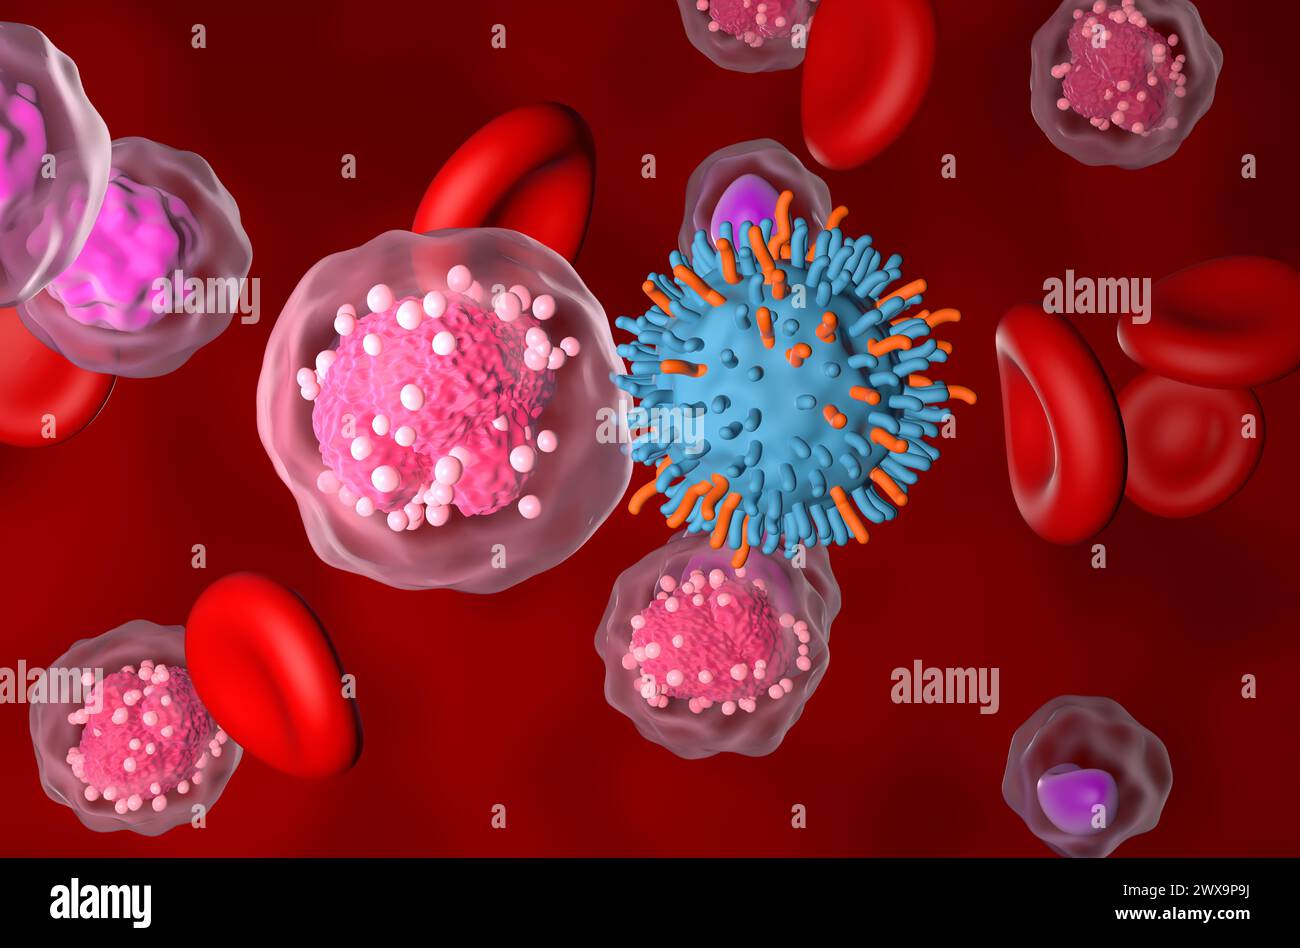 CAR T cell therapy in Acute Lymphocytic Leukemia (ALL) - closeup view 3d illustration Stock Photo